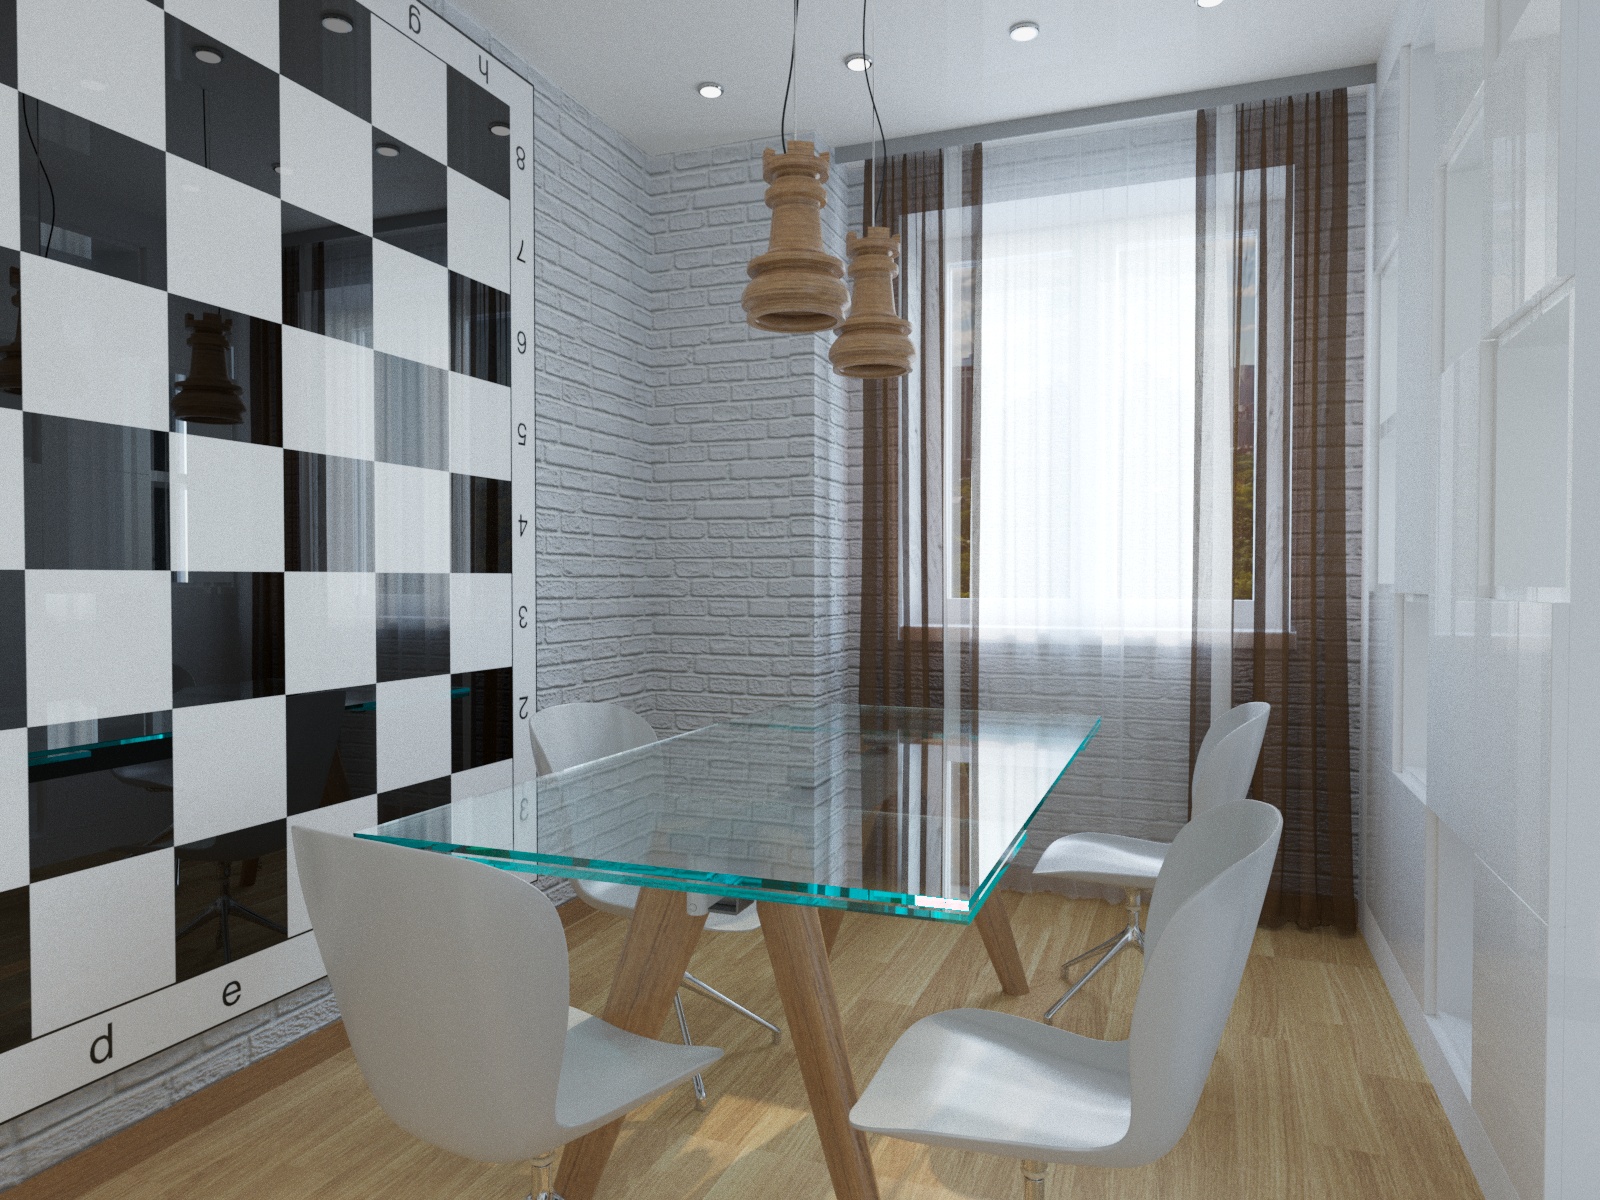 Design rooms in the hotel. in 3d max corona render image